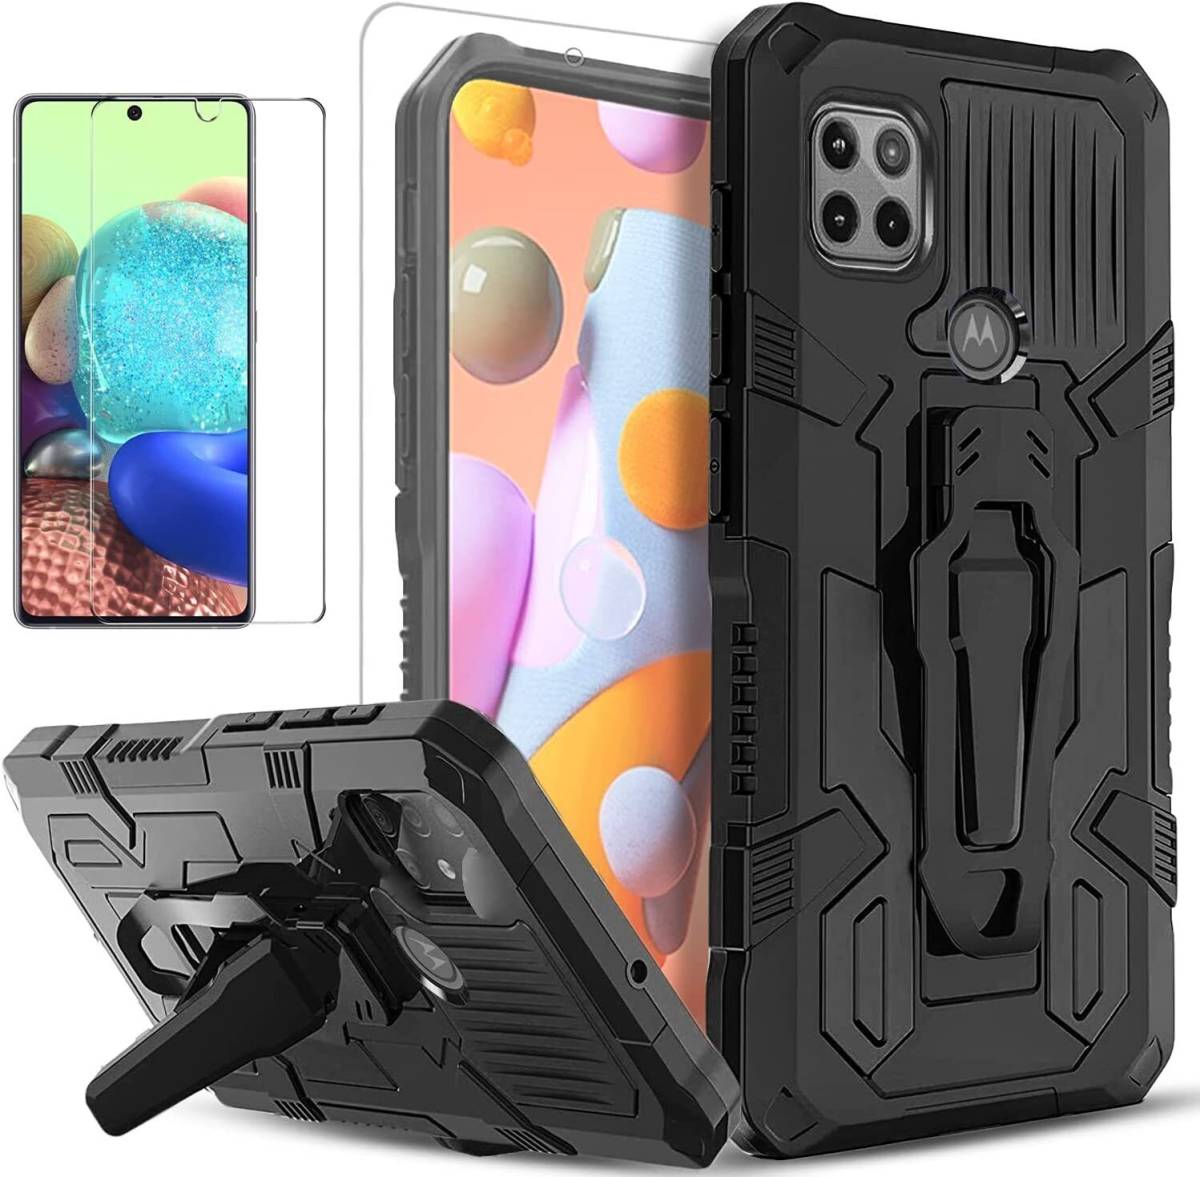 For Motorola One 5G Ace Case with Tempered Glass, Full Body, Belt Clip,Stand 海外 即決